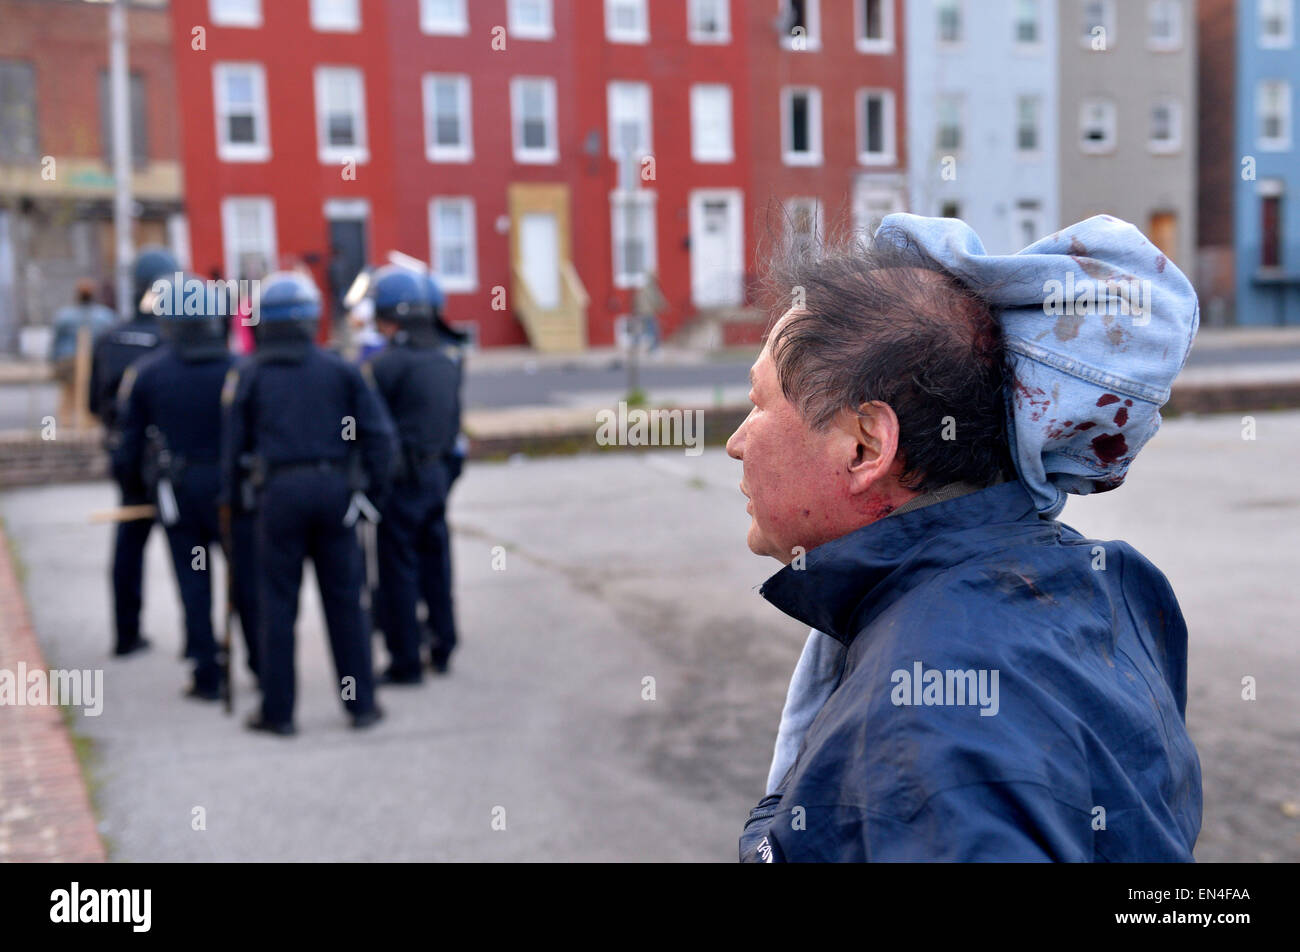 Baltimore, USA. 27th Apr, 2015. A man is injured on the head by looters in Baltimore, Maryland, the United States, April 27, 2015. Maryland governor Larry Hogan Monday evening declared a state of emergency and activated the National Guard to address the escalating violence and unrest in Baltimore City following the funeral of a 25-year-old black man who died after he was injured in police custody. Credit:  Yin Bogu/Xinhua/Alamy Live News Stock Photo